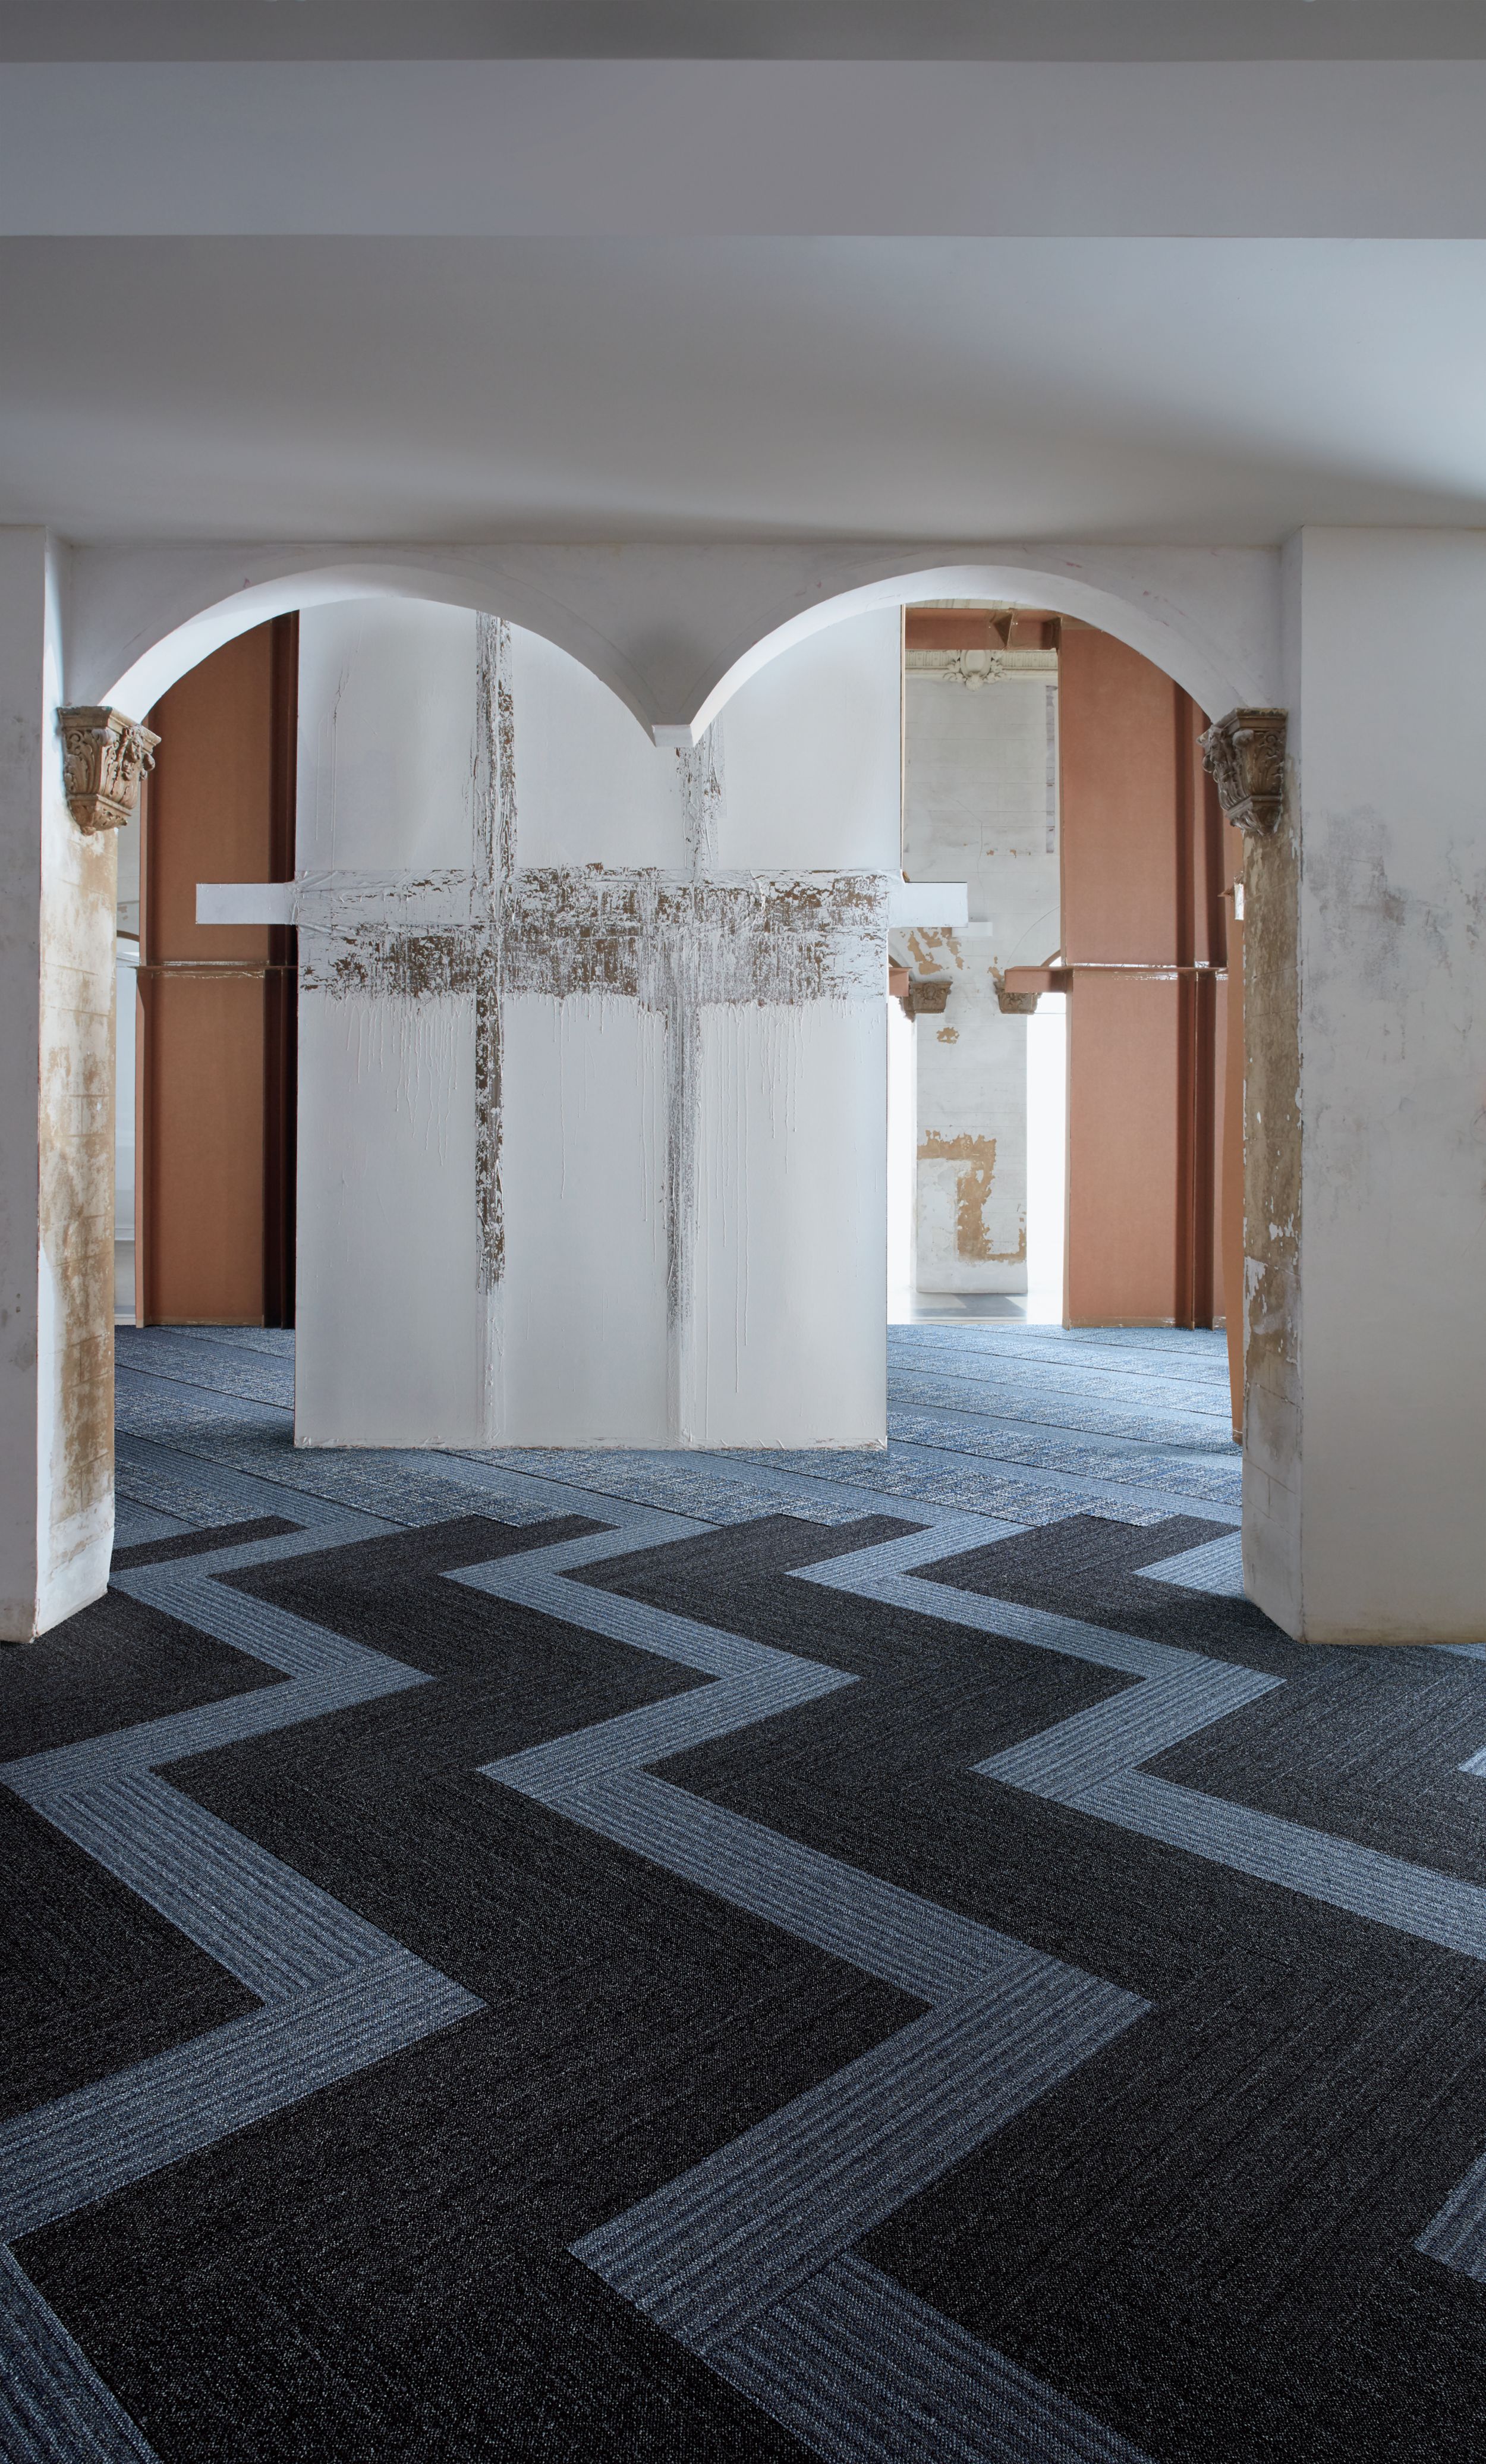 Interface WW865 and WW895 plank carpet tile in lobby setting with archway imagen número 7